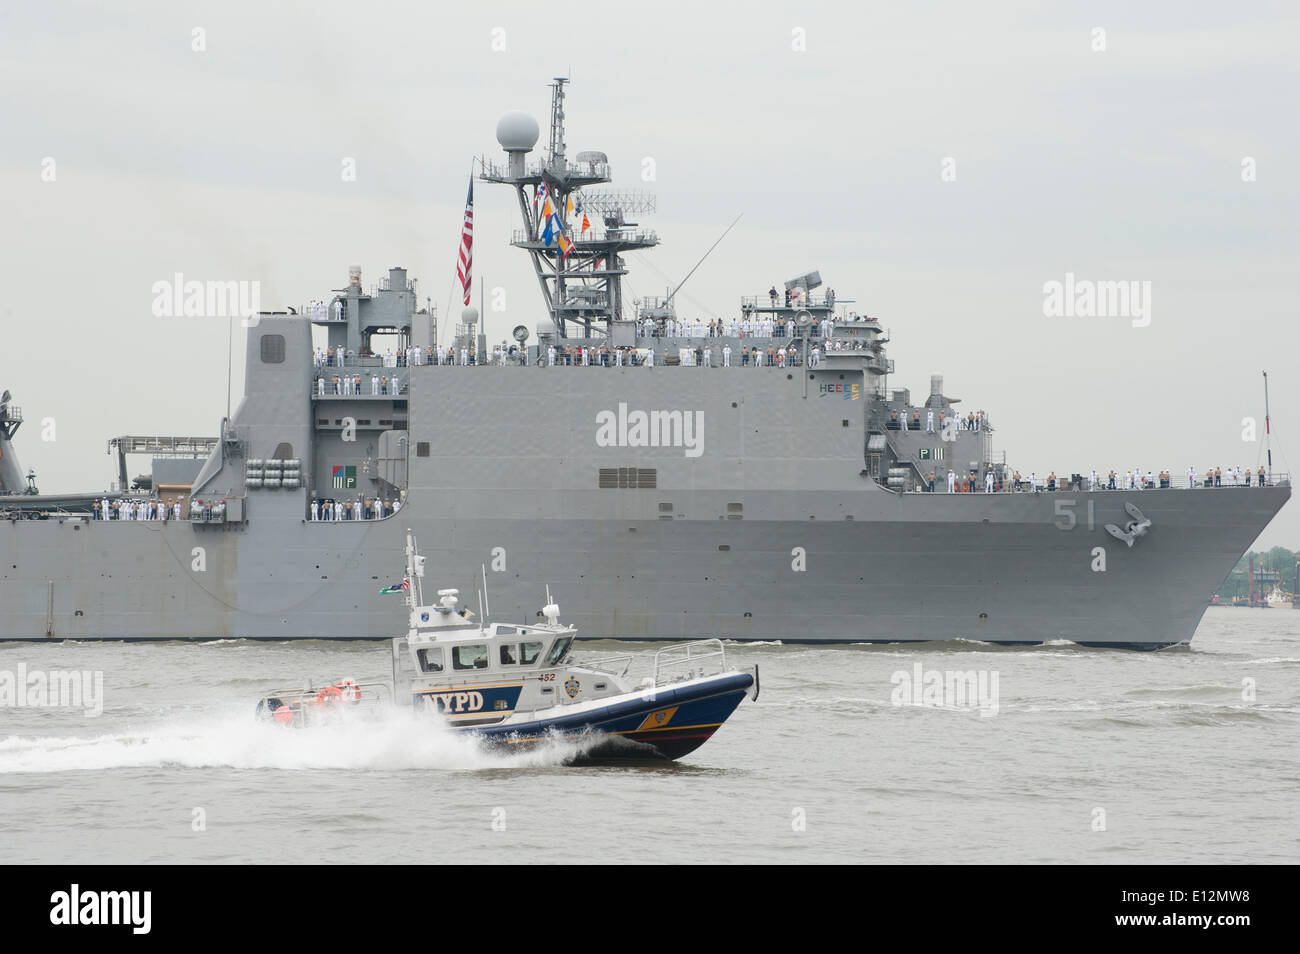 New York, NY — May 21, 2014. The USS Oak Hill (LSD-51), an amphibious ship carrying both U.S. Navy and U.S. Marine personnel, arrived in New York harbor on May 21, 2014 at the start of Fleet Week. The USS Oak Hill was commissioned in June 1996 and has served in the Mediterranean Sea, the Persian Gulf and on the Horn of Africa. Fleet Week brings around 1,500 sailors, marines and U.S. Coast Guardsmen to New York City, with ship tours, aerial demonstrations and parades. (© Terese Loeb Kreuzer 2014) Credit:  Terese Loeb Kreuzer/Alamy Live News Stock Photo